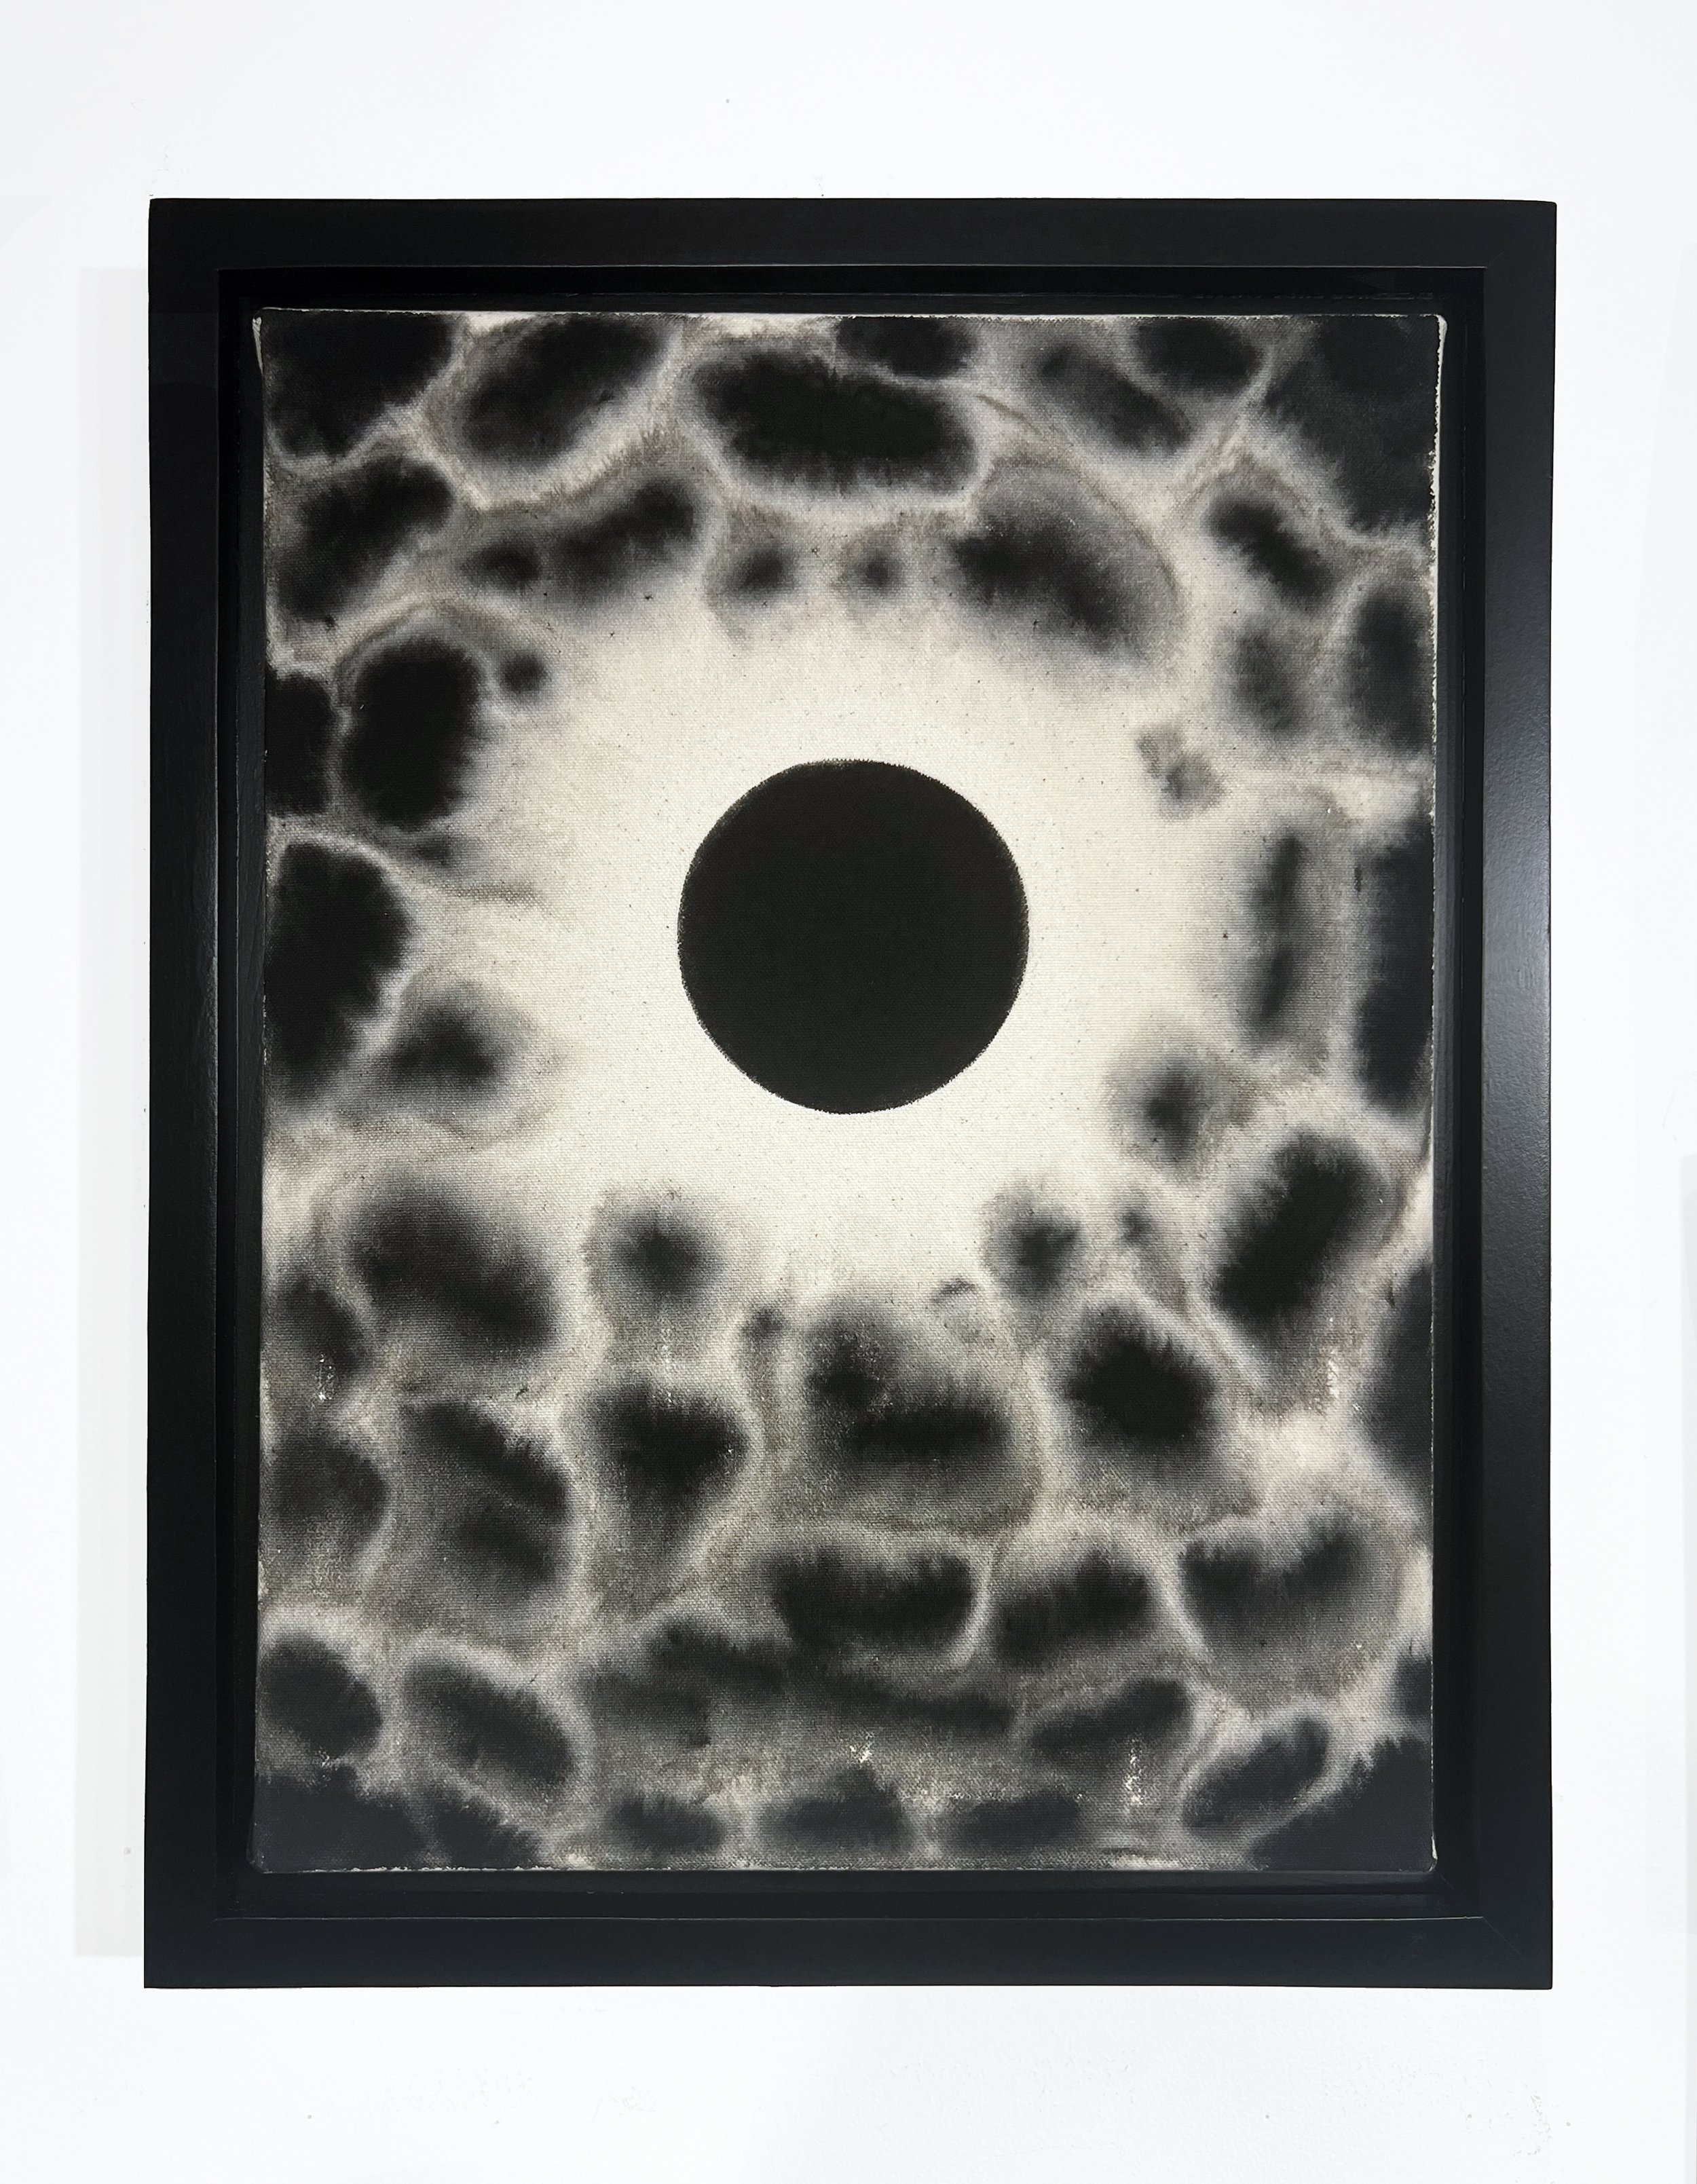   Untitled (black sun) , from Transcendental Series, 2022 Black gesso on raw canvas 11 x 14 inches (28cm x 35.5cm) 